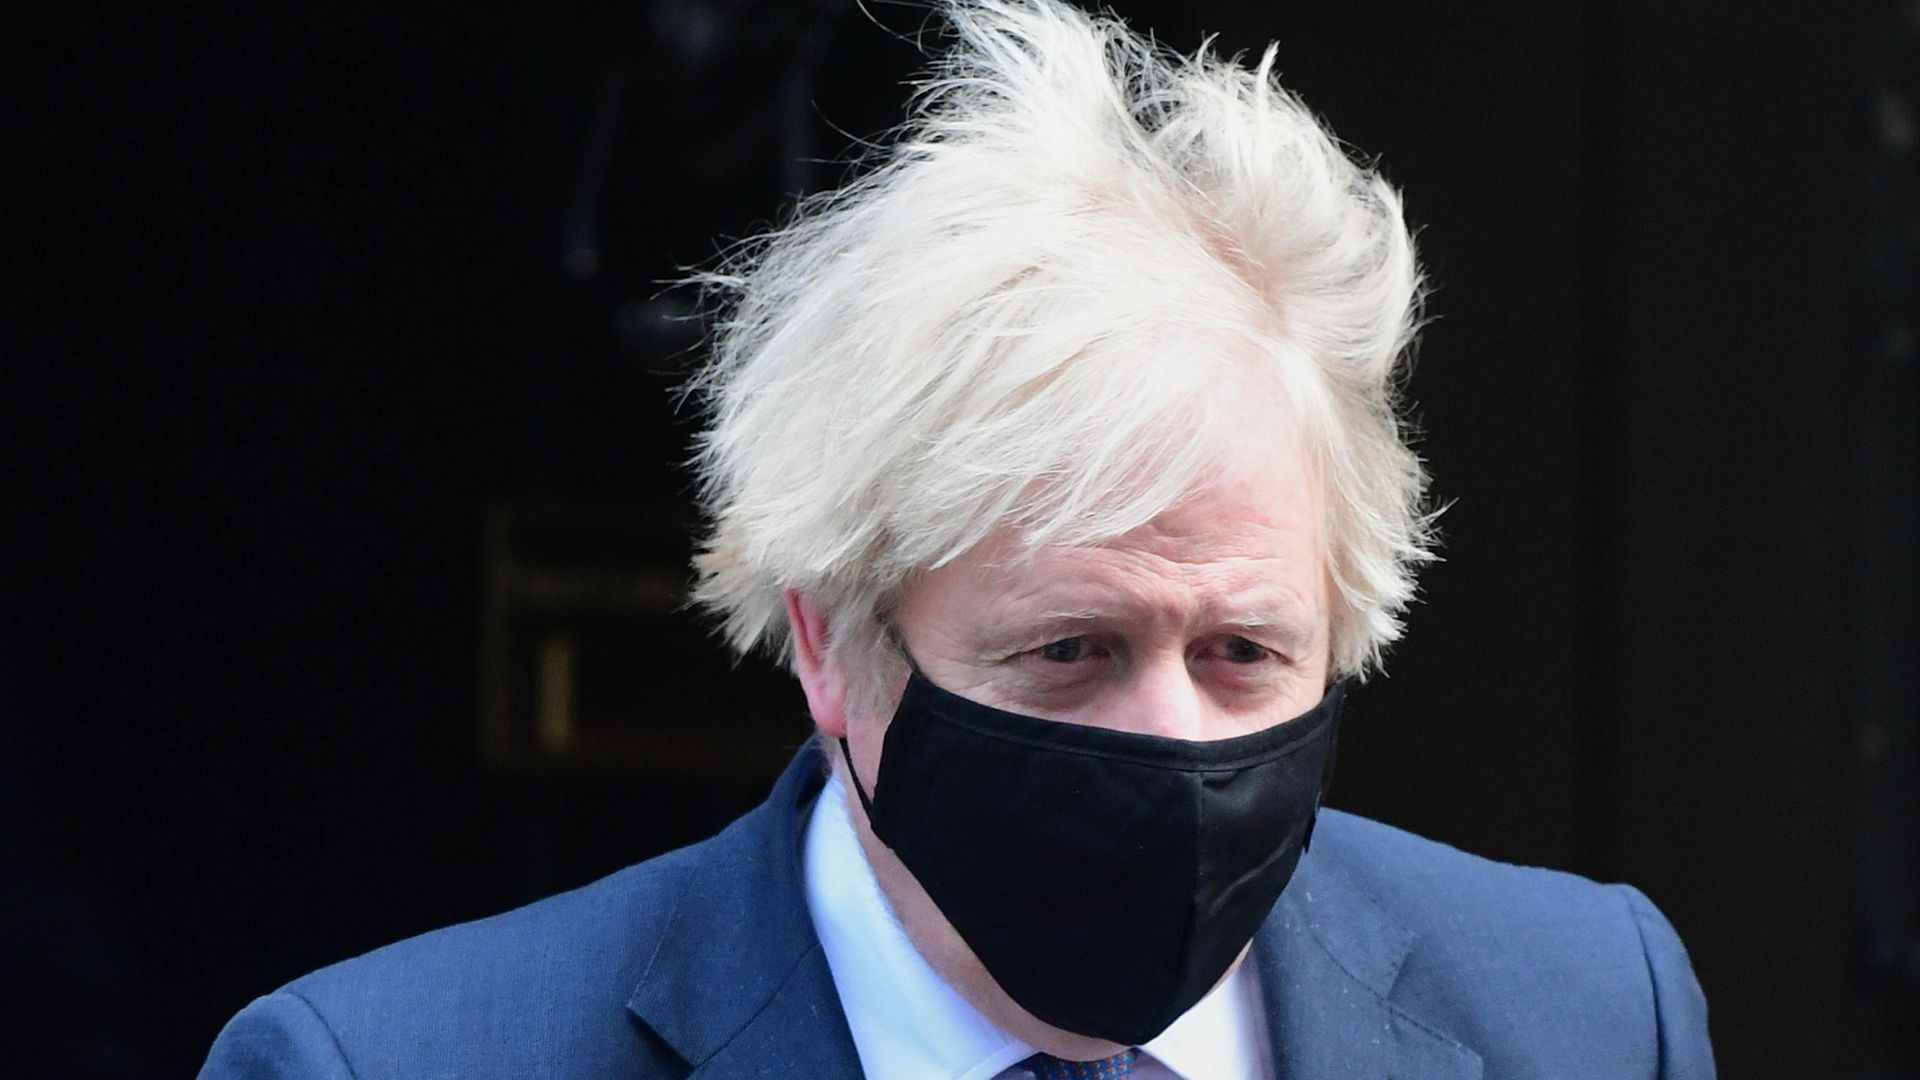 Prime Minister Boris Johnson leaving 10 Downing Street, central London, for the House of Commons where MPs are to vote on the restrictions imposed in England's third national lockdown. - Credit: PA